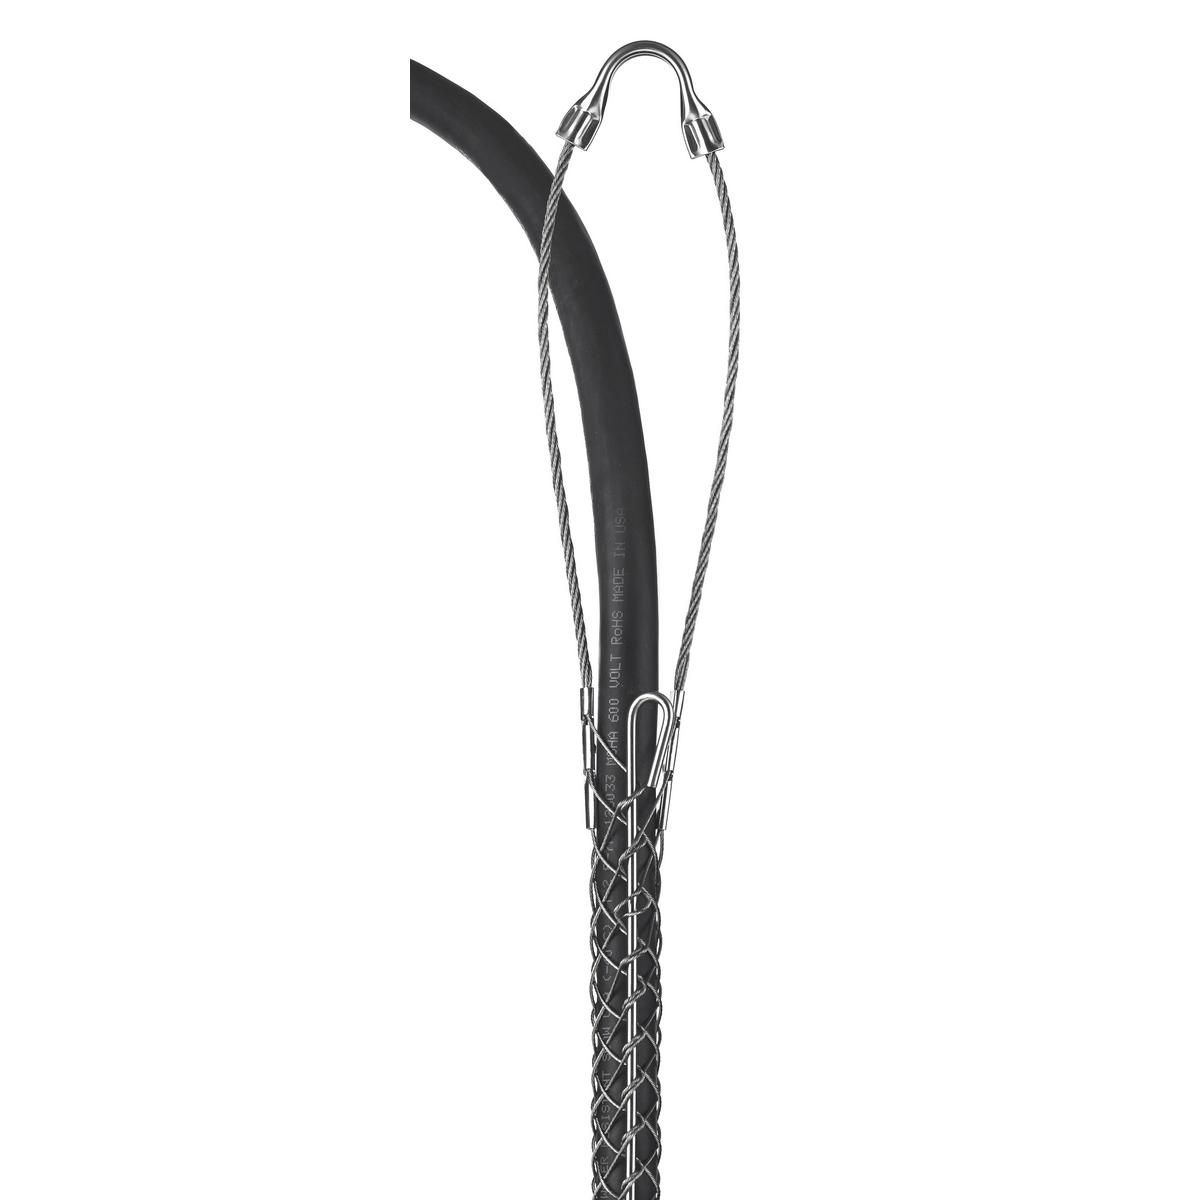 Hubbell 02403015 Support Grips, Single Eye, Single Weave, Split Mesh, Rod Closing, Stainless Steel, 0.75-0.99"  ; Single eye ; Strand equalizers position wires for equal loading throughout grip length ; Eye assemblies provide eye reinforcement at support hardware ; Split 